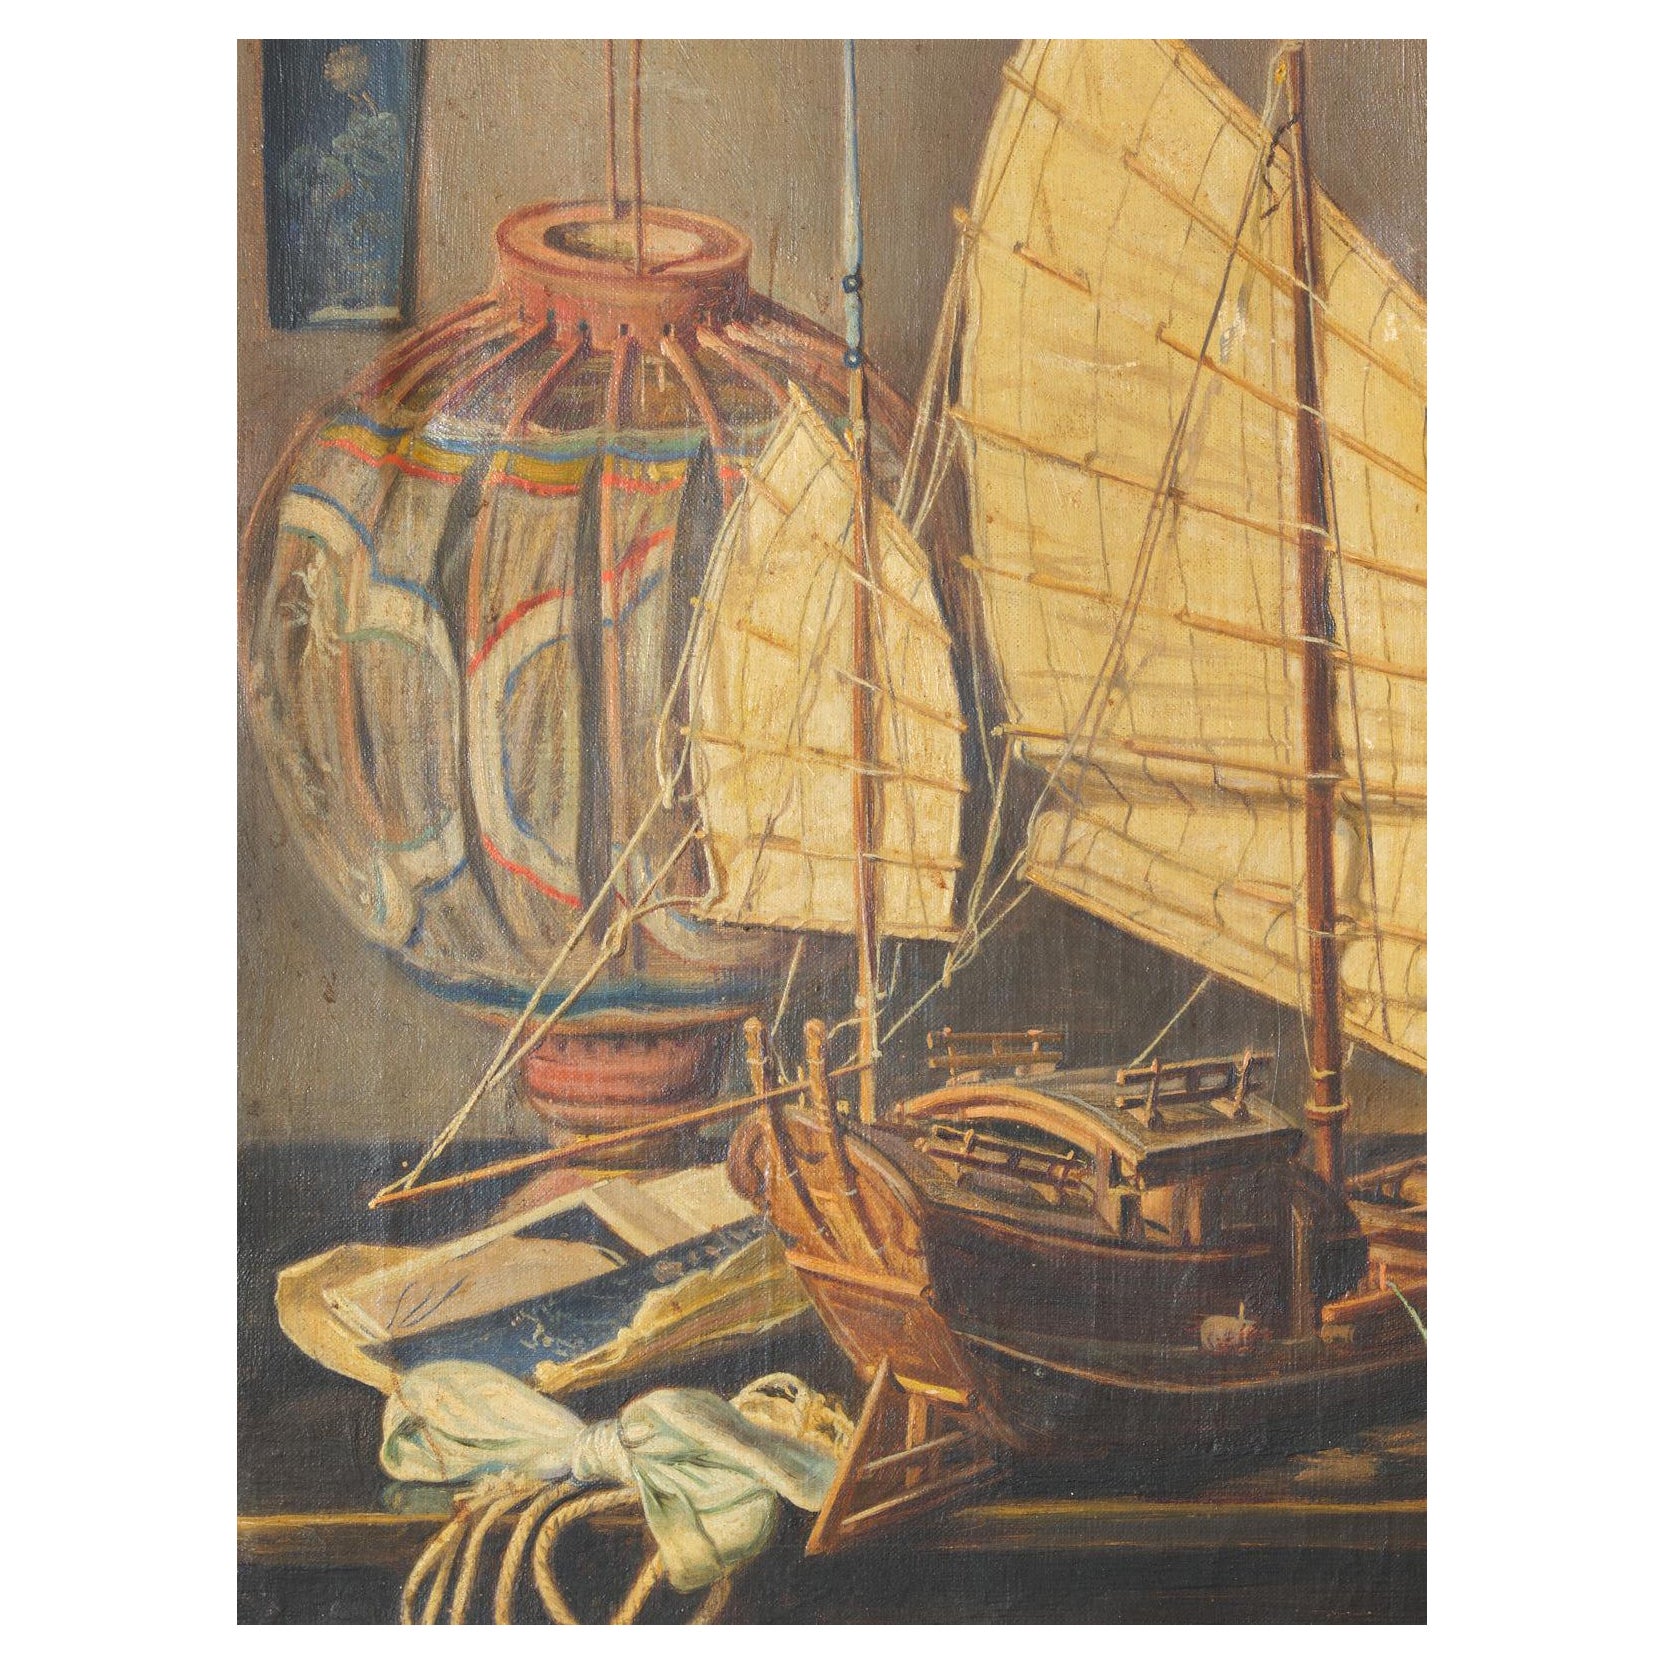 Painting, Oil, Signed, Painting of a Junk & a Lantern, C 1920, Florence, Italy